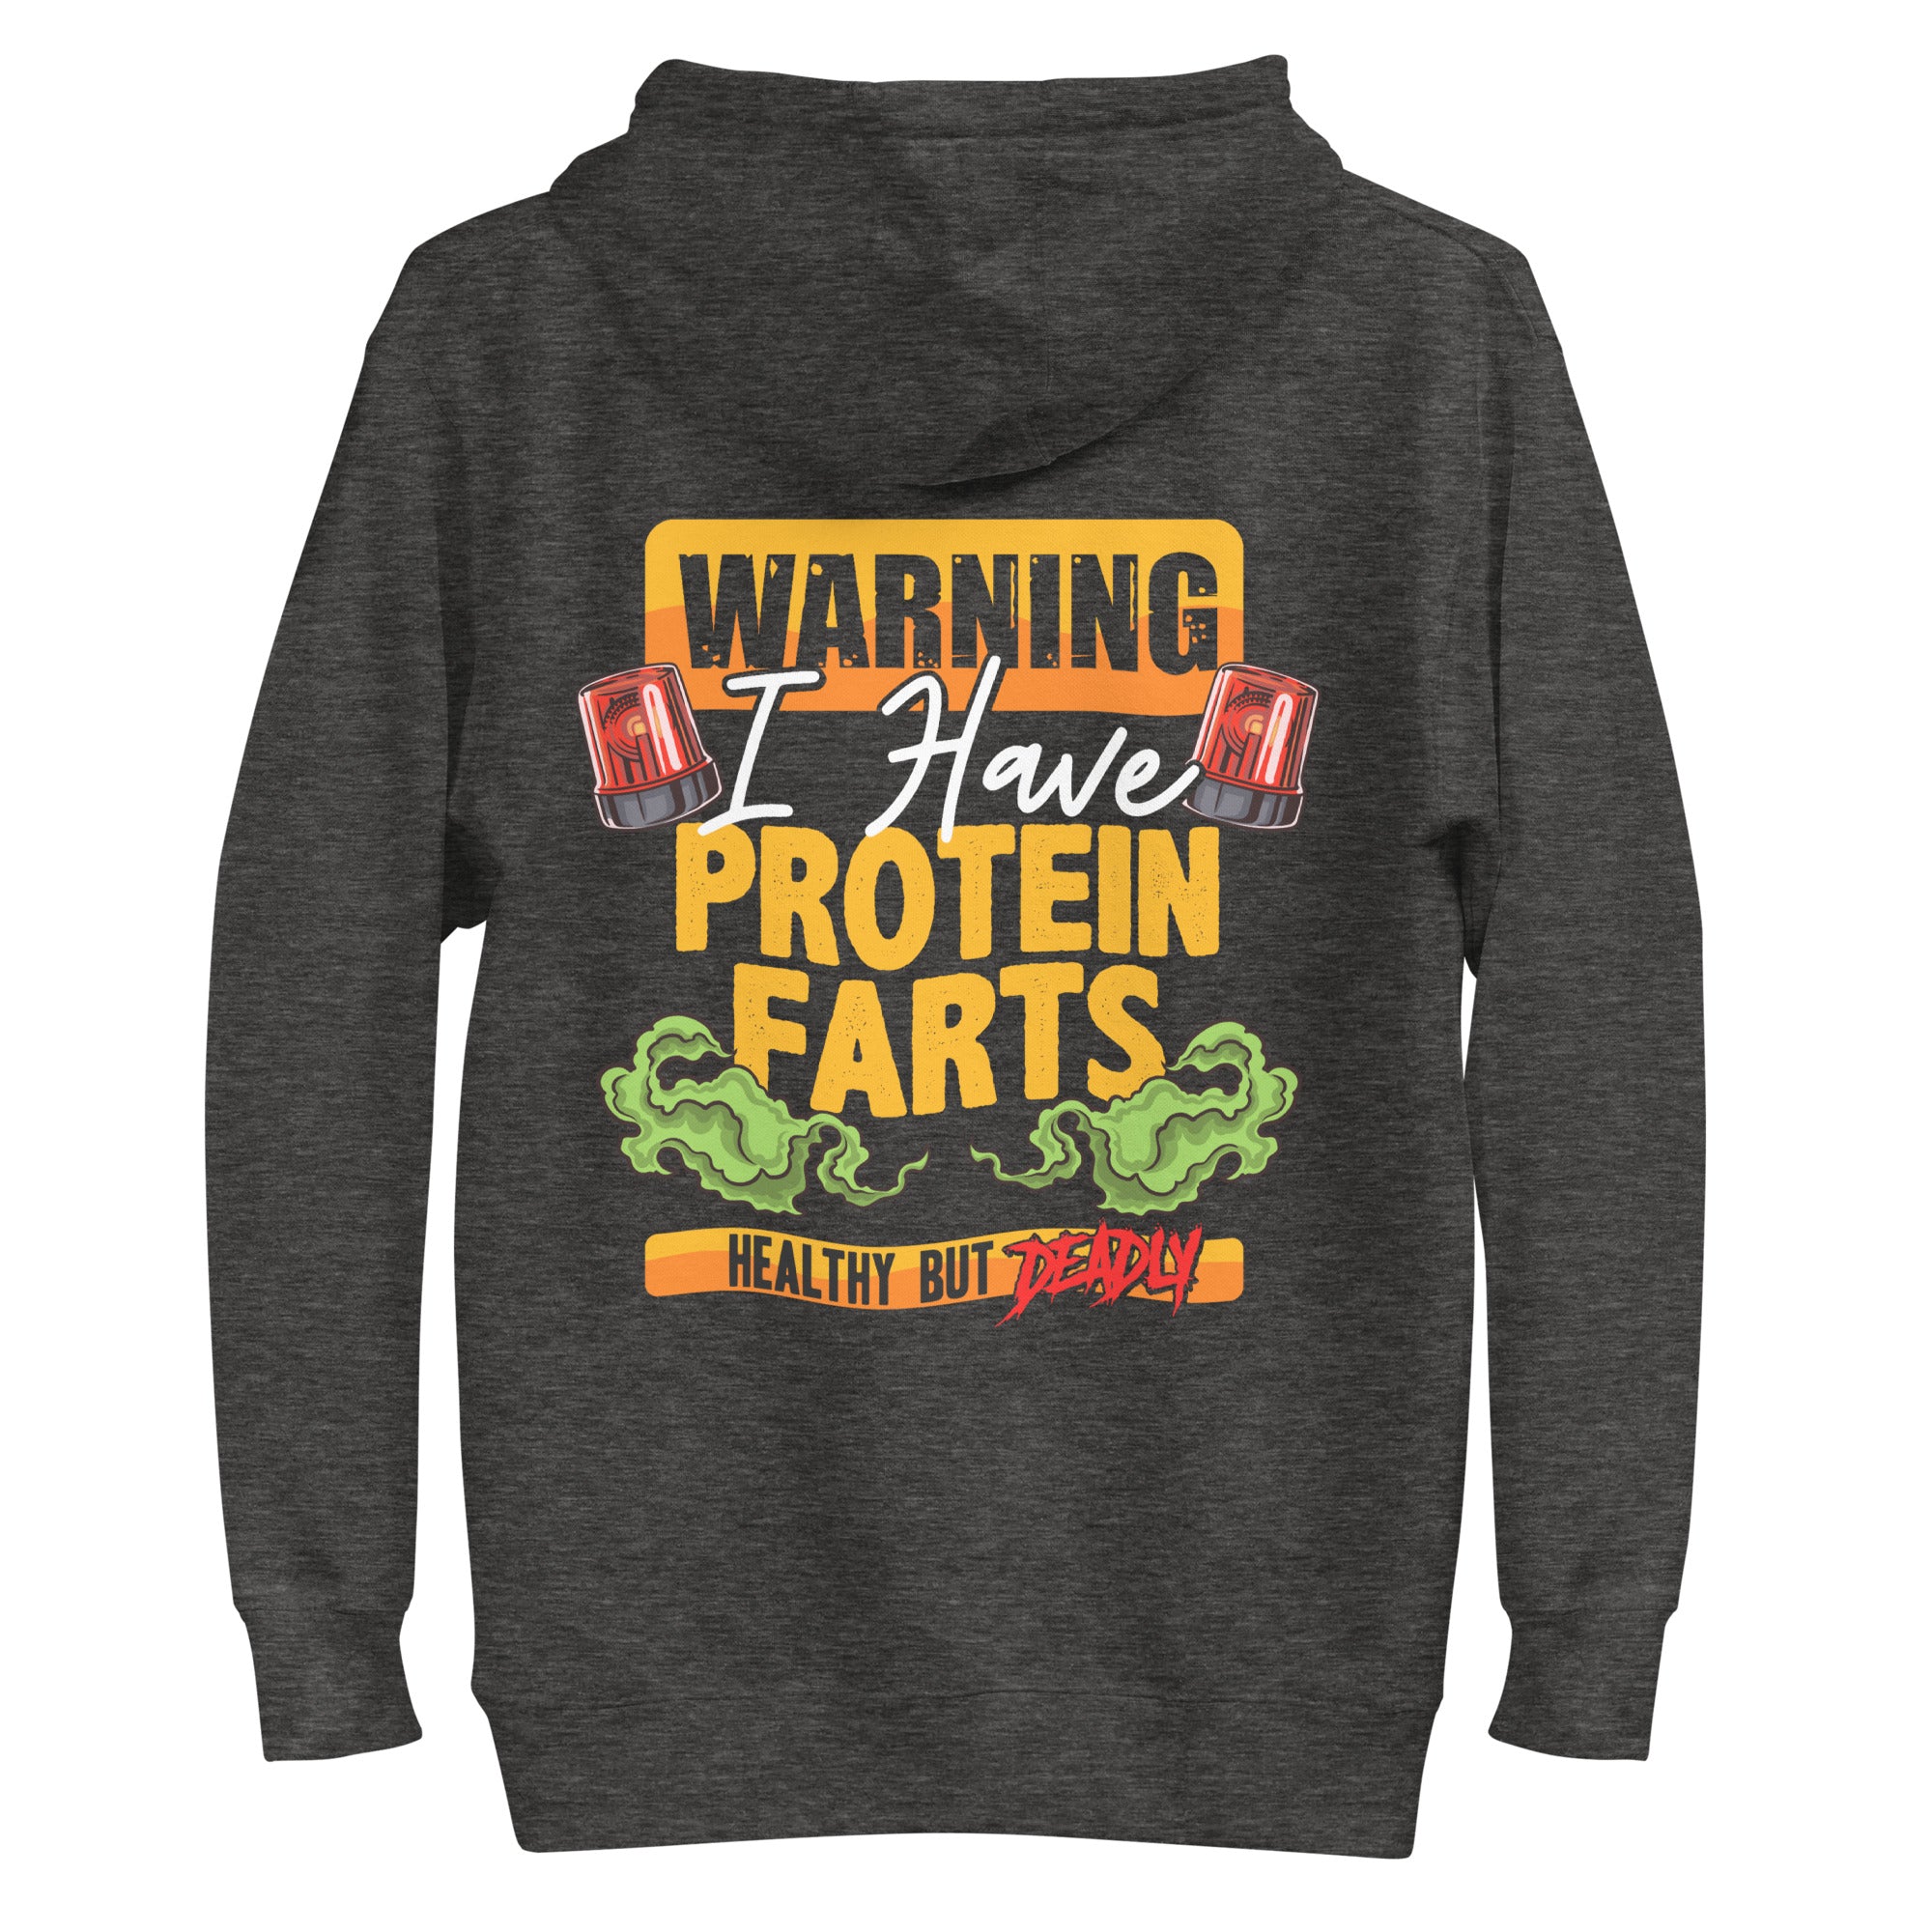 "Warning, I have Protein Farts, Healthy but Deadly" Unisex Hoodie